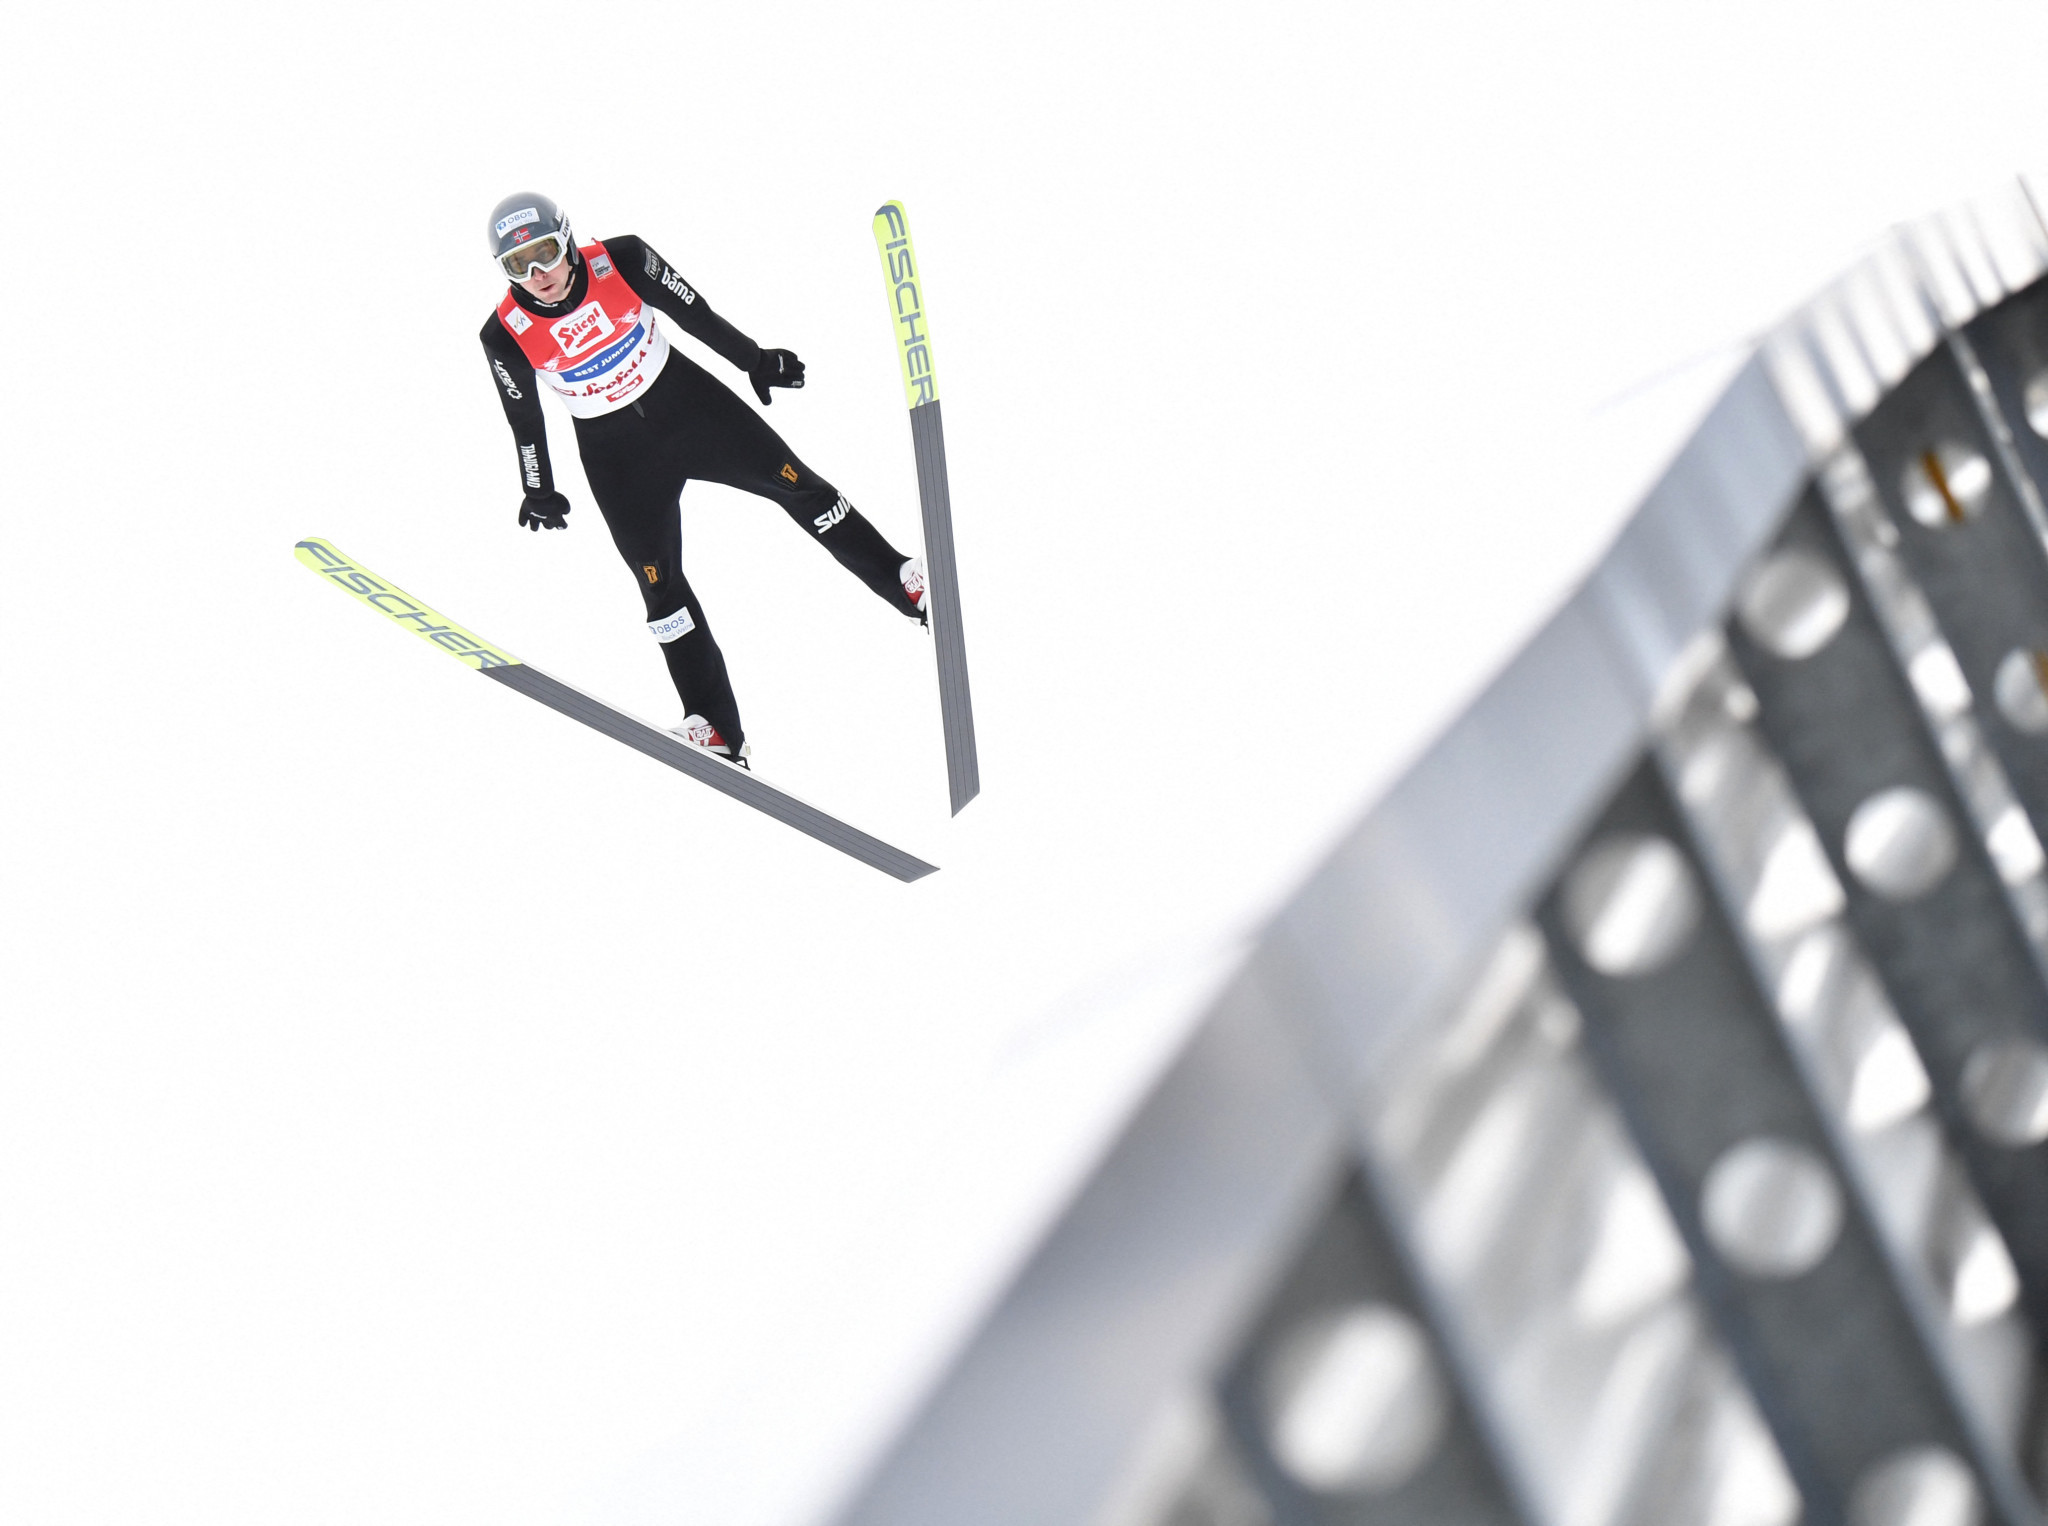 Riiber sets up thrilling finale to FIS Nordic Combined World Cup with fourth consecutive victory